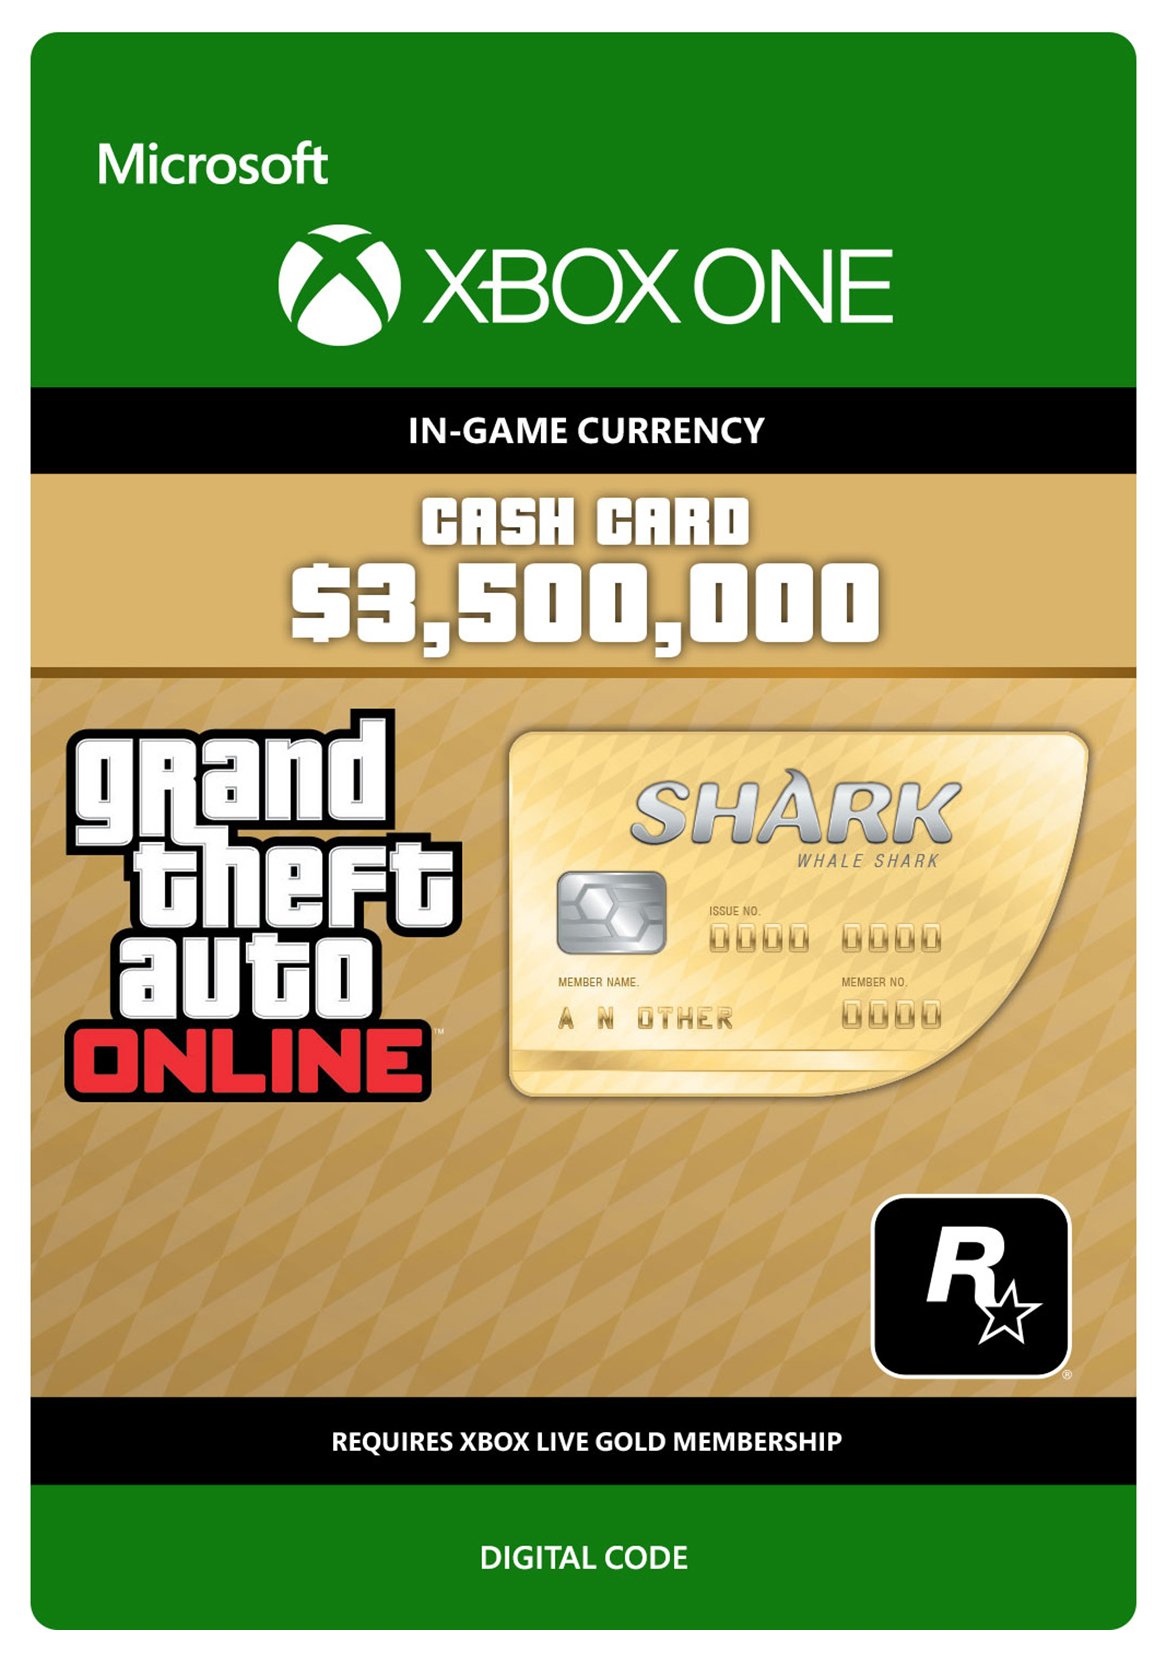 Grand Theft Auto Whale Shark V Xbox One Cash Card Review